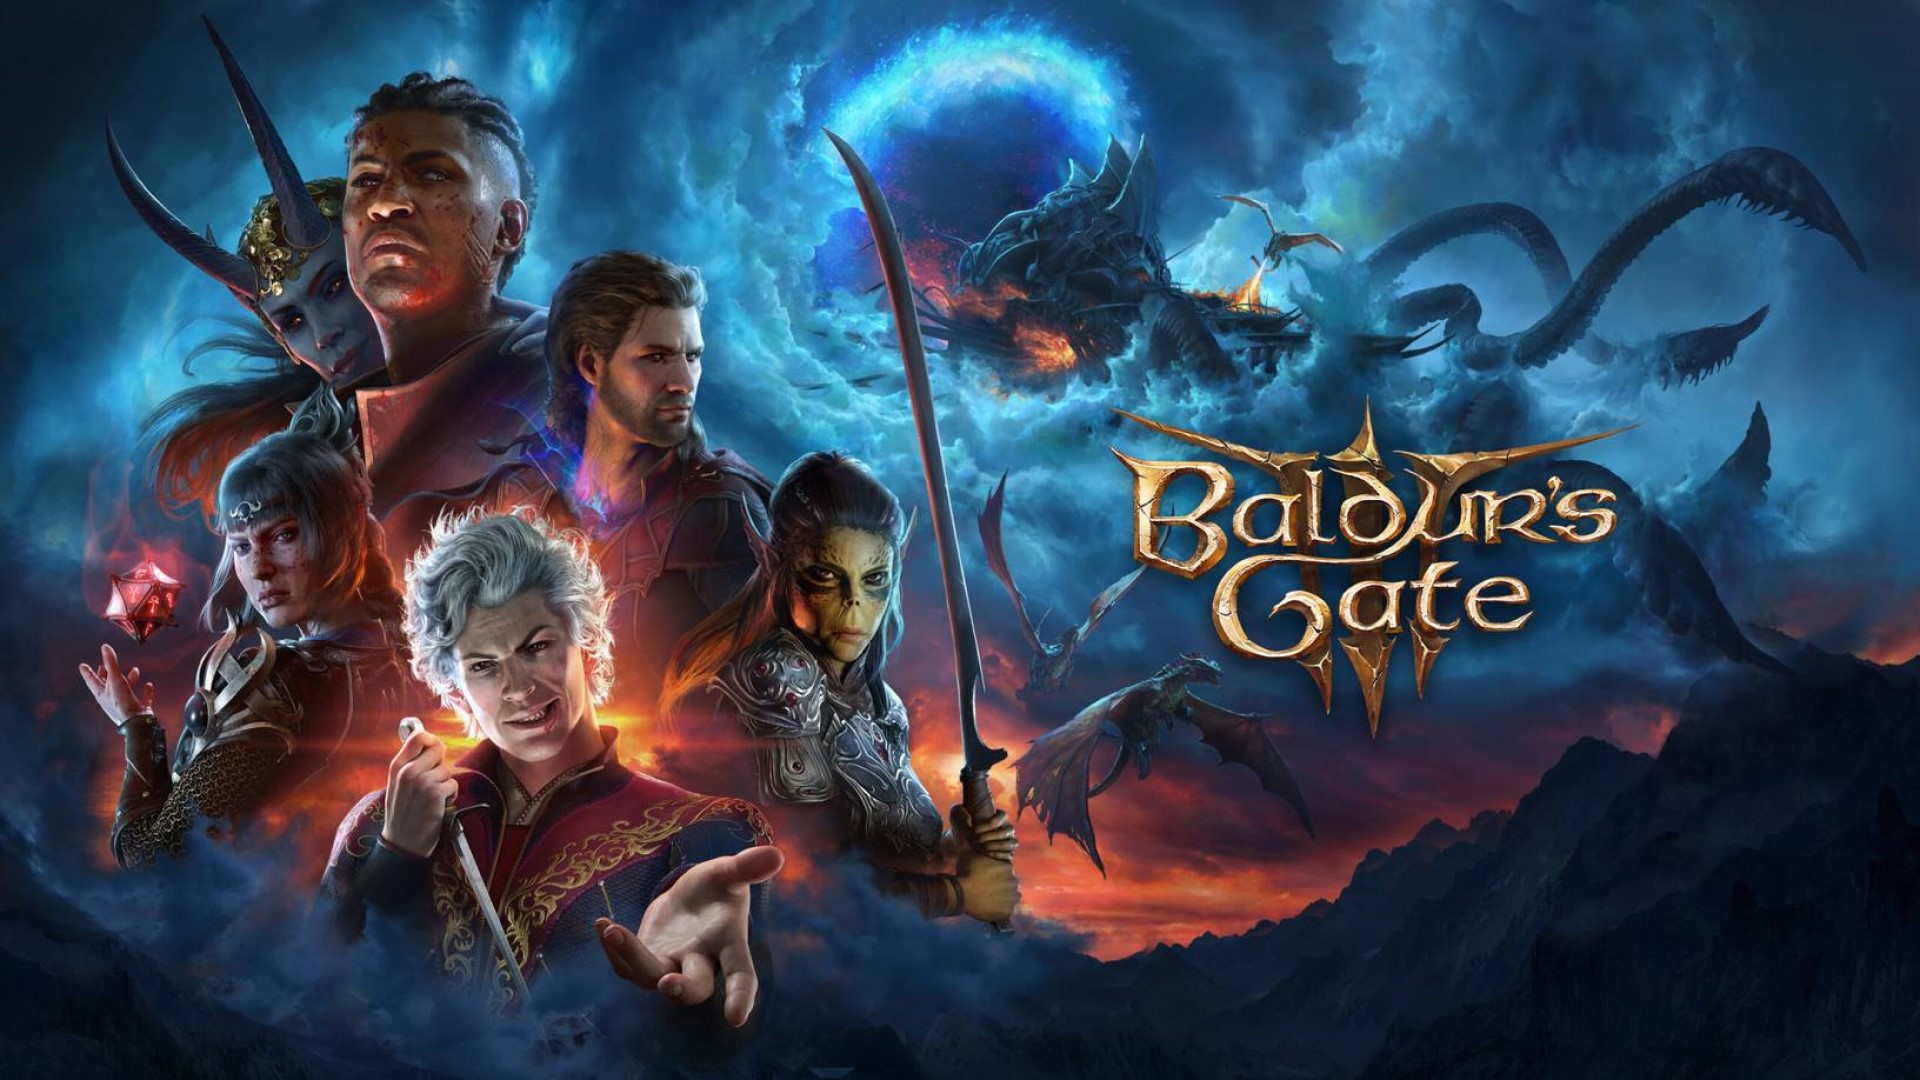 Baldur’s Gate 3 On PS5 – Everything You Need to Know